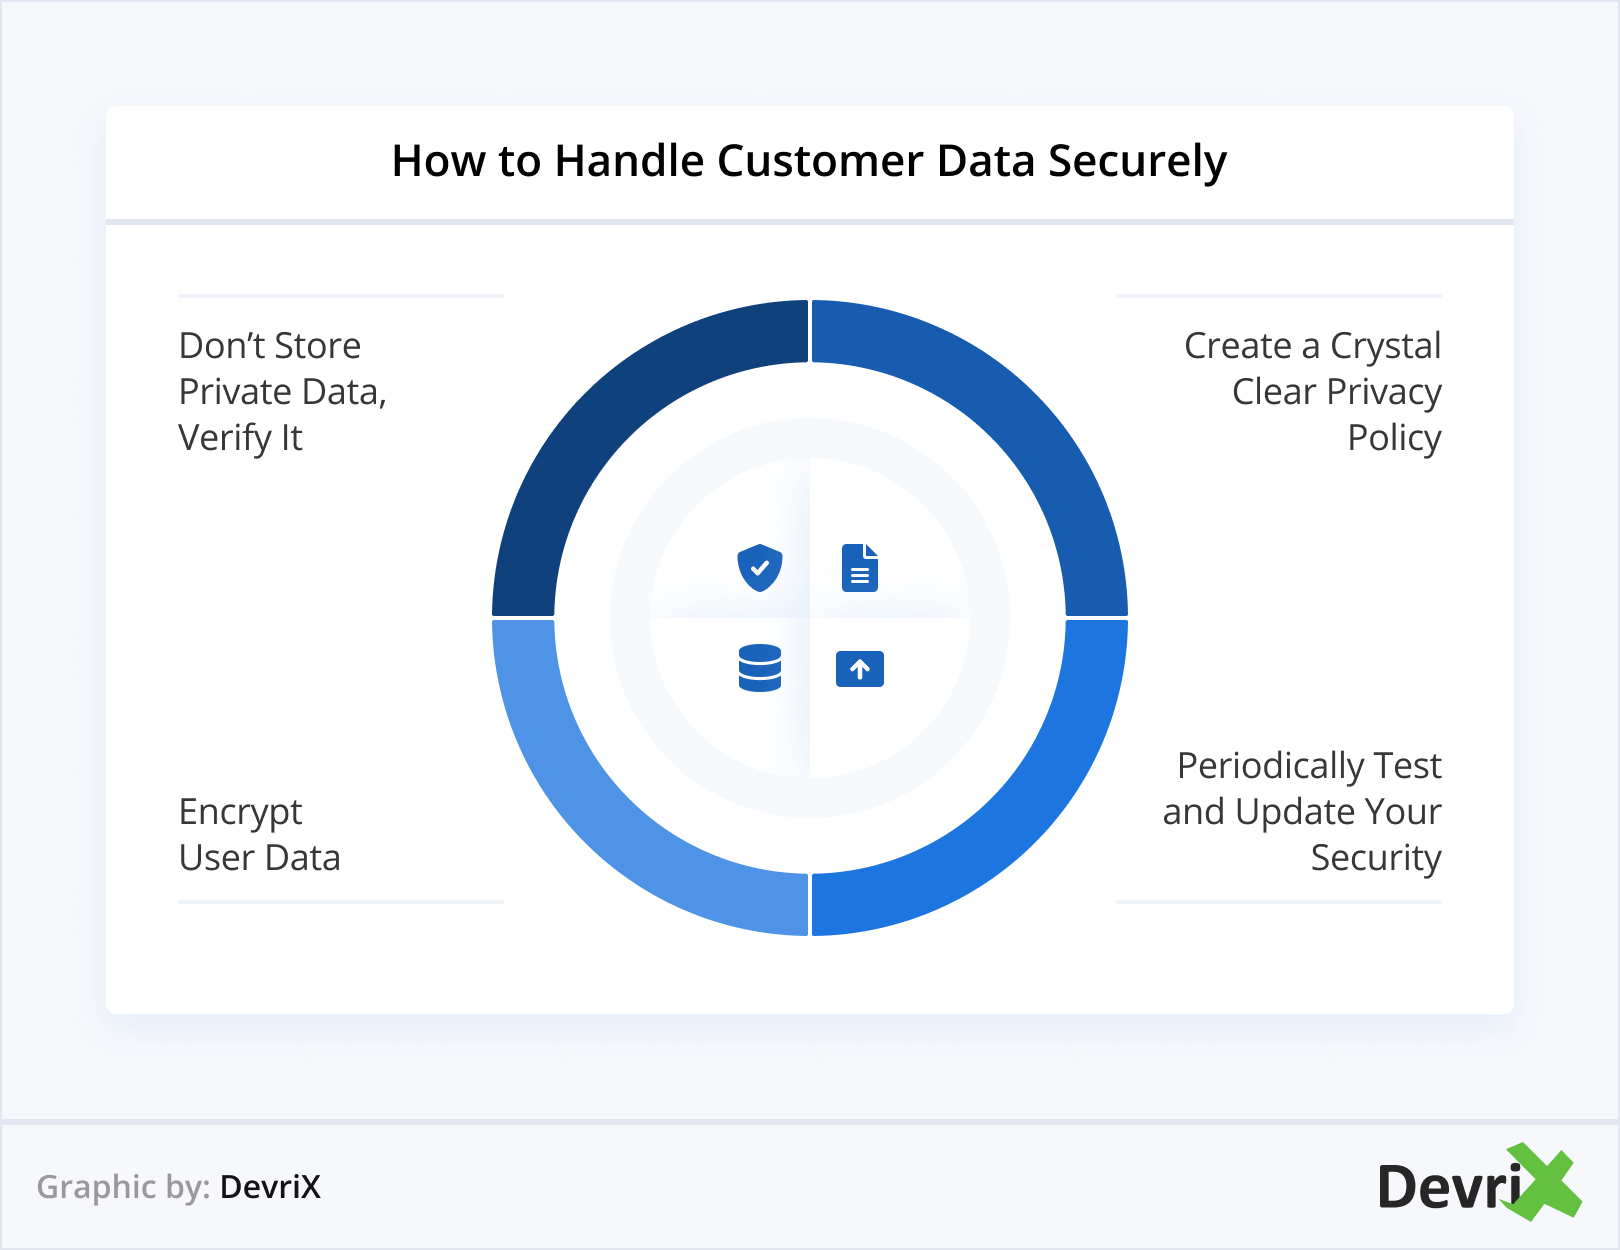 How to Handle Customer Data Securely